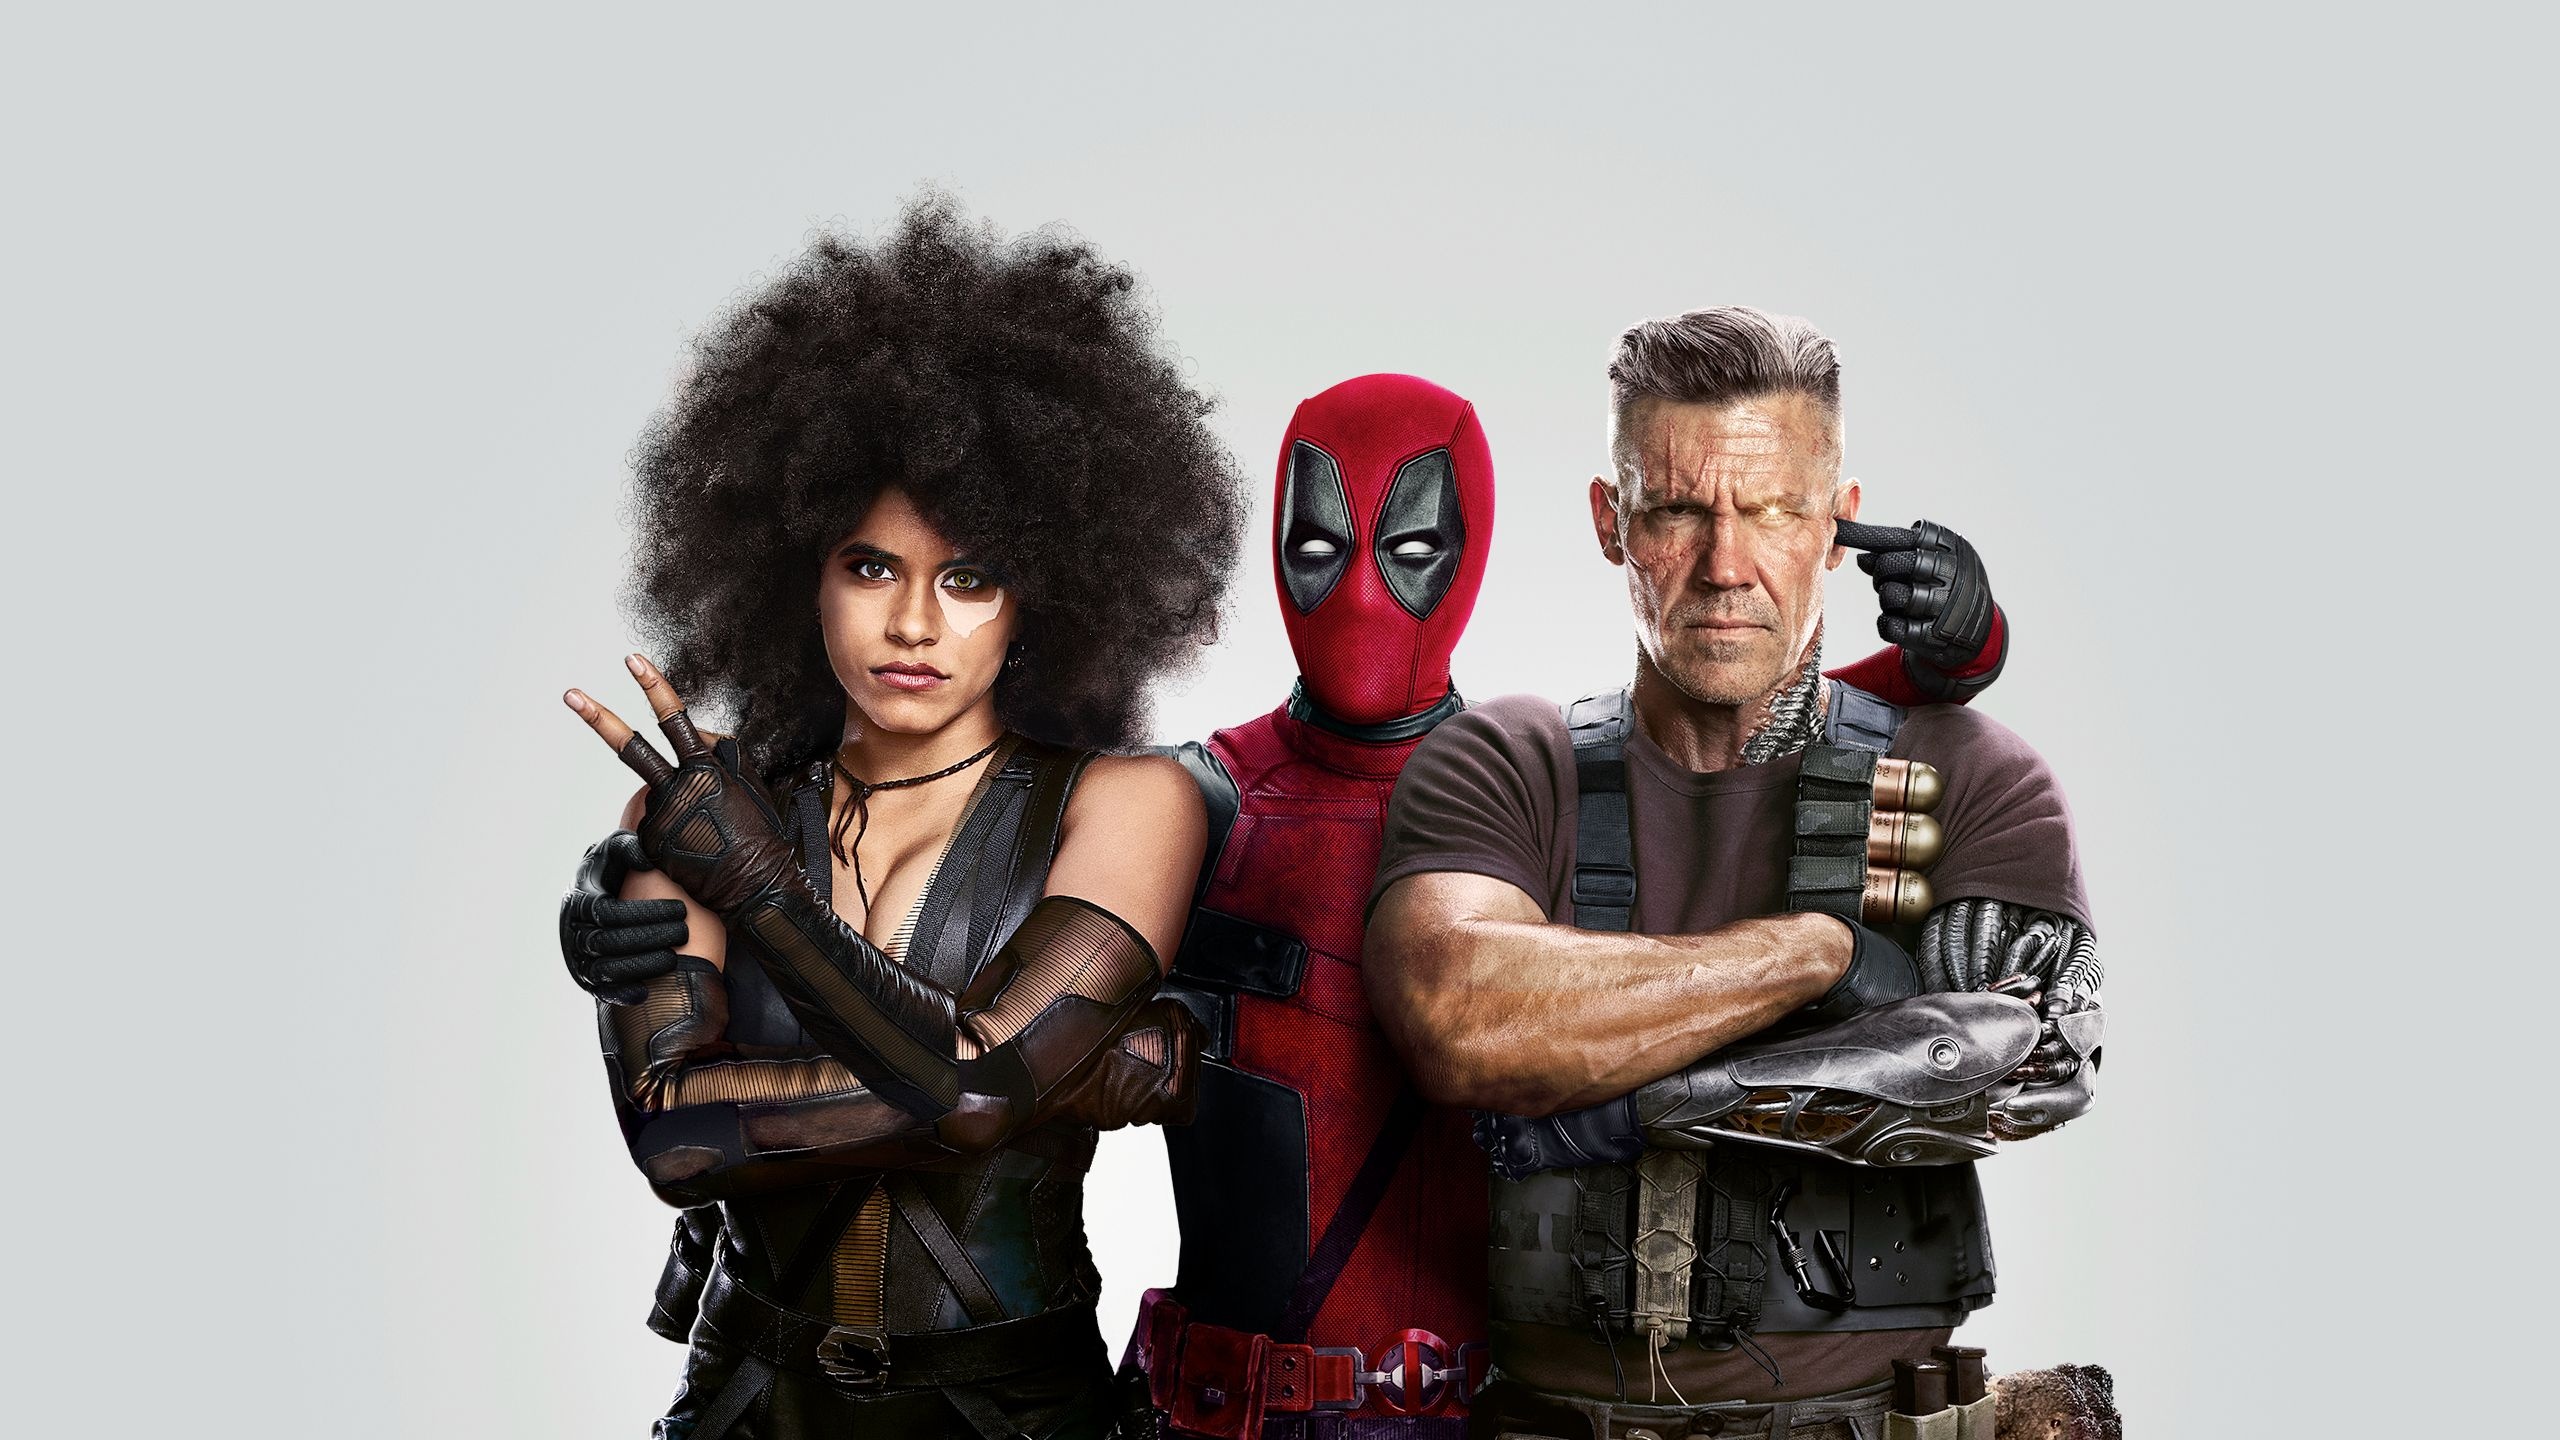 Deadpool 2 movies anywhere, Digital release, Streaming option, Movie accessibility, 2560x1440 HD Desktop